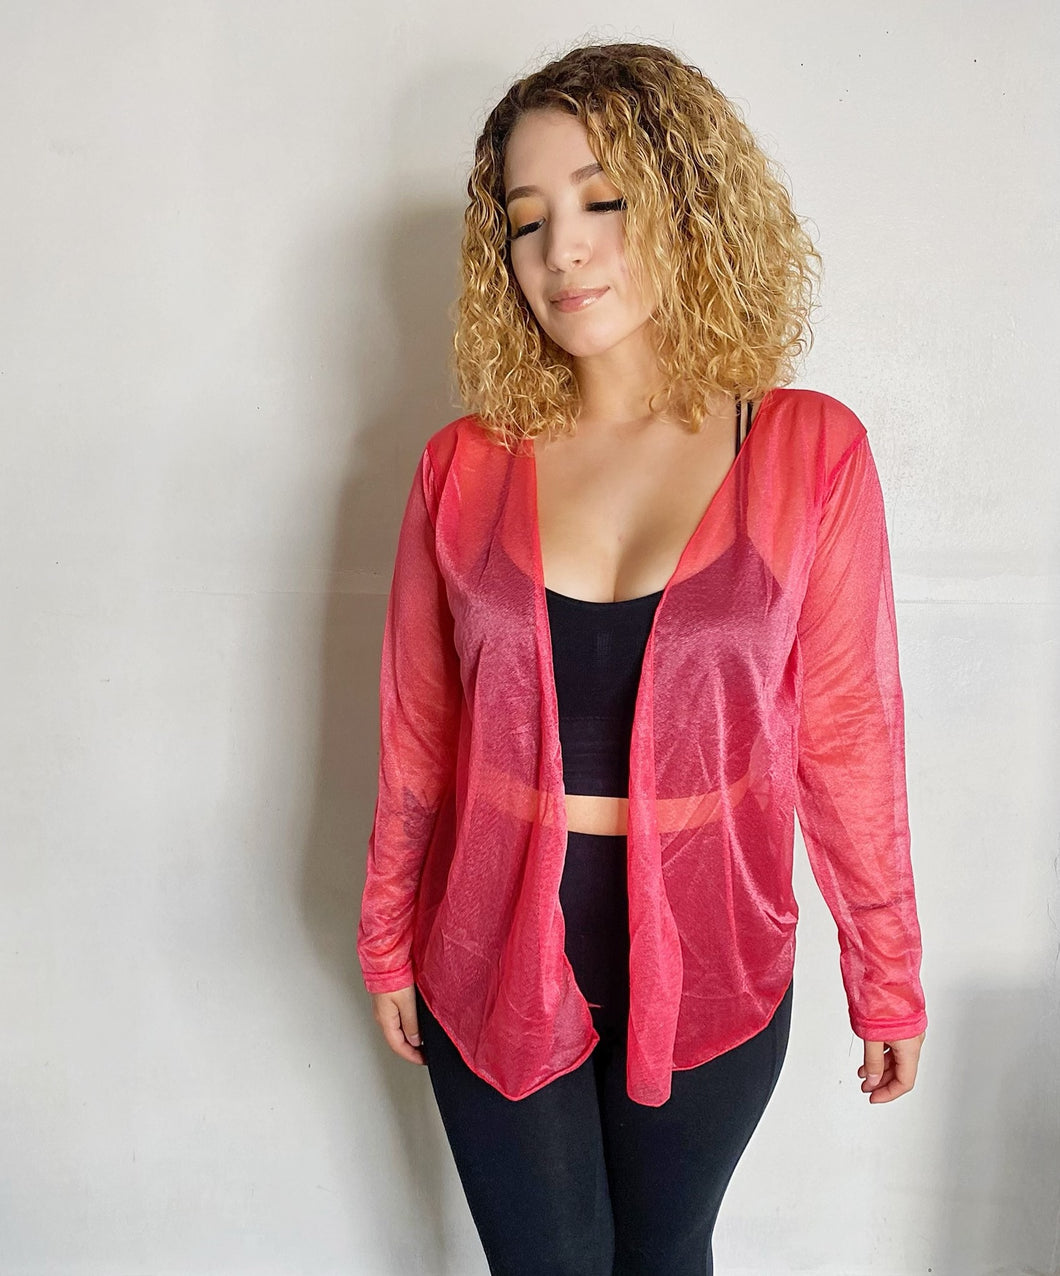 Girl with curly hair wearing a pink cardigan.